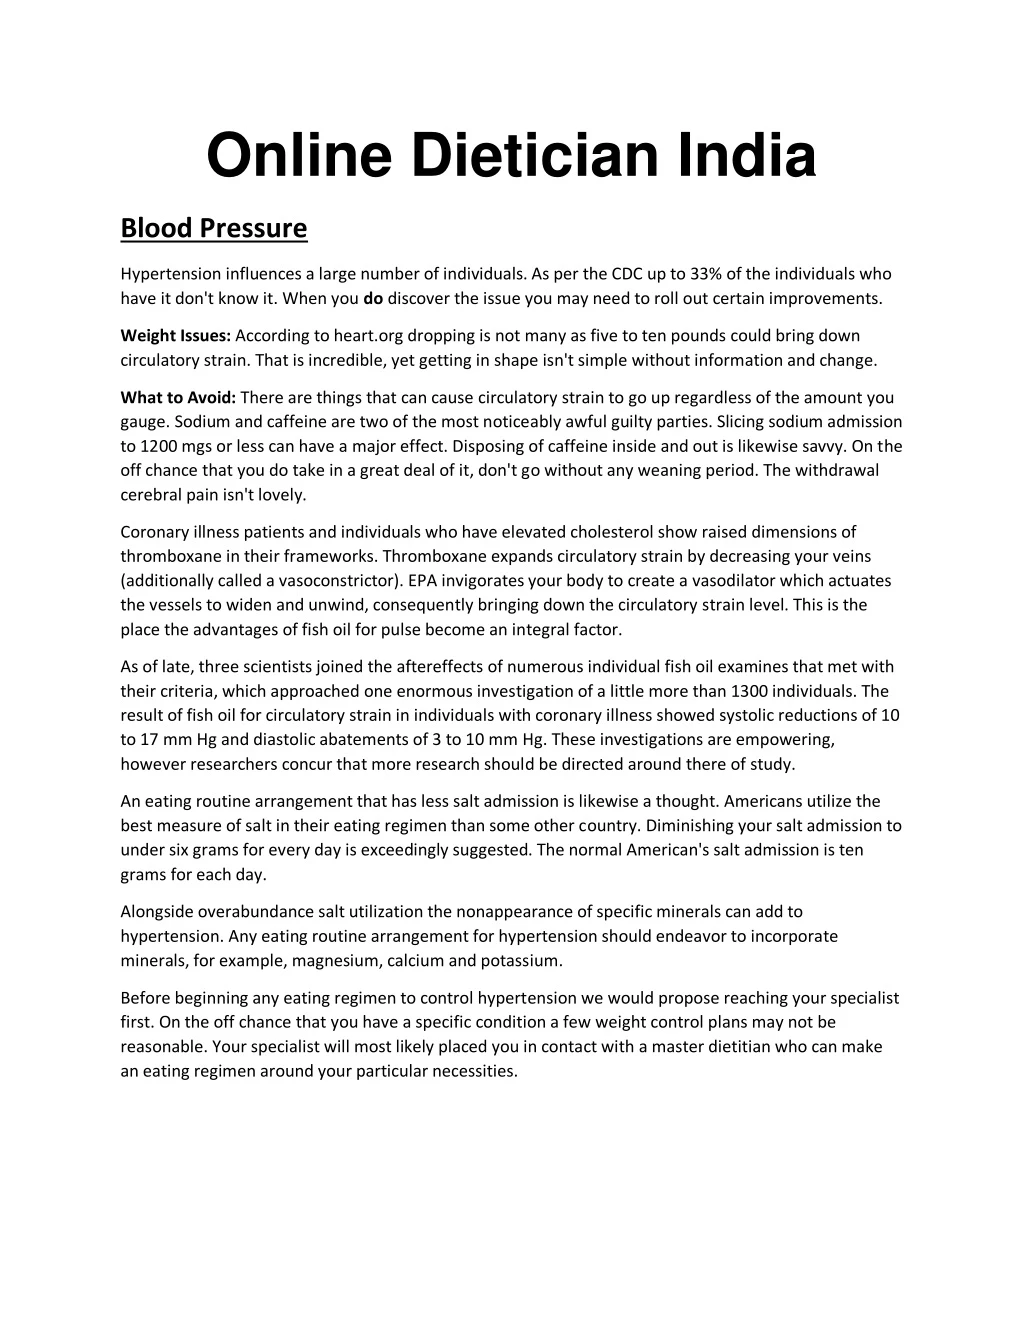 online dietician india